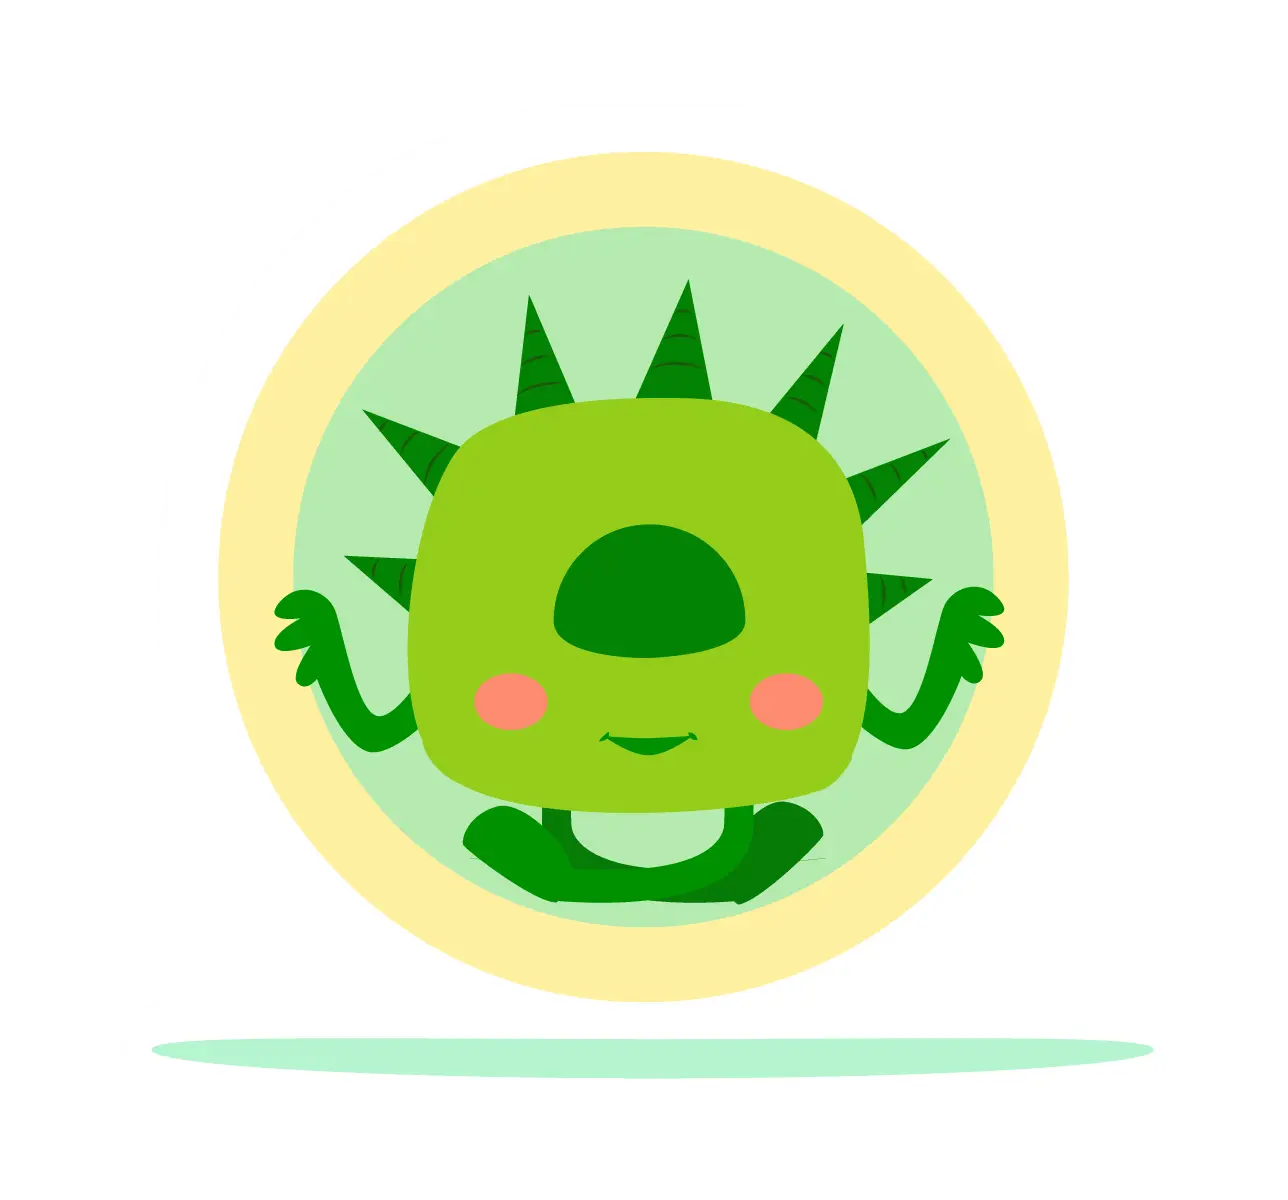 A monster meditates like kids can with KidsBeeTV app mindfulness tools for kids